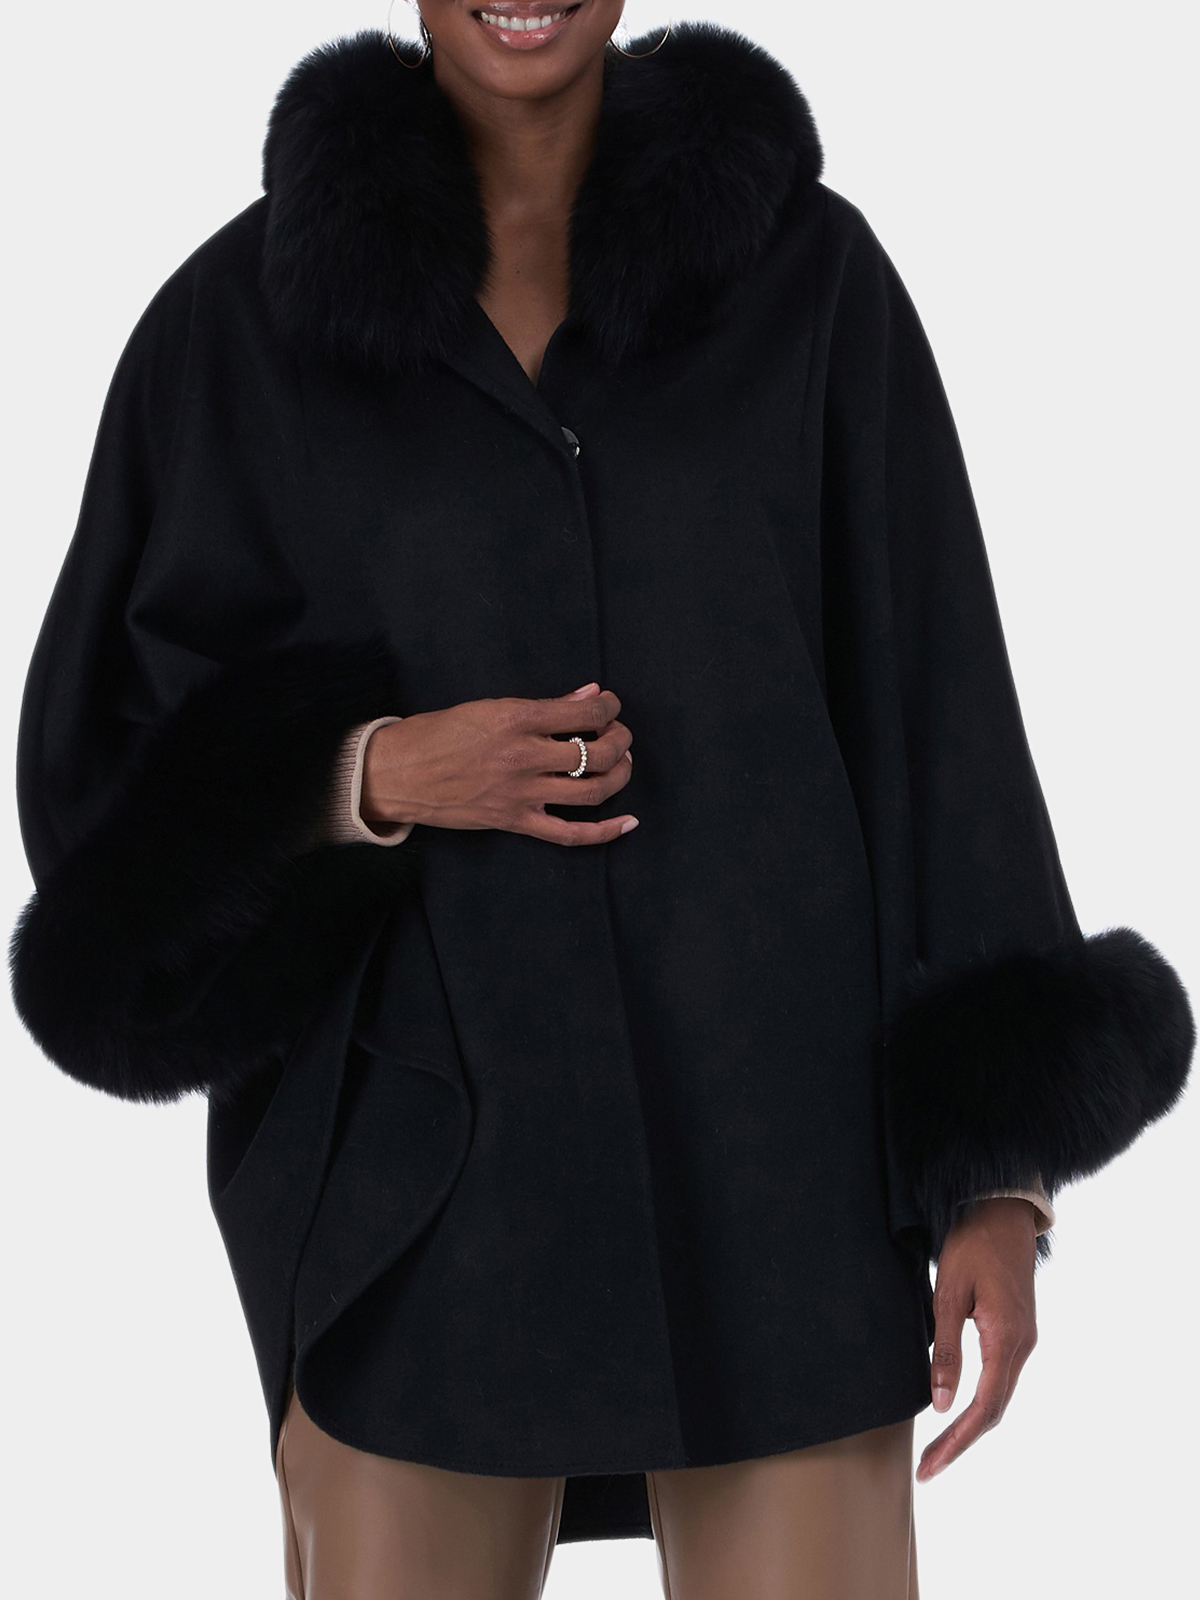 Gorski Woman's Black Wool and Cashmere Cape with Fox Trim